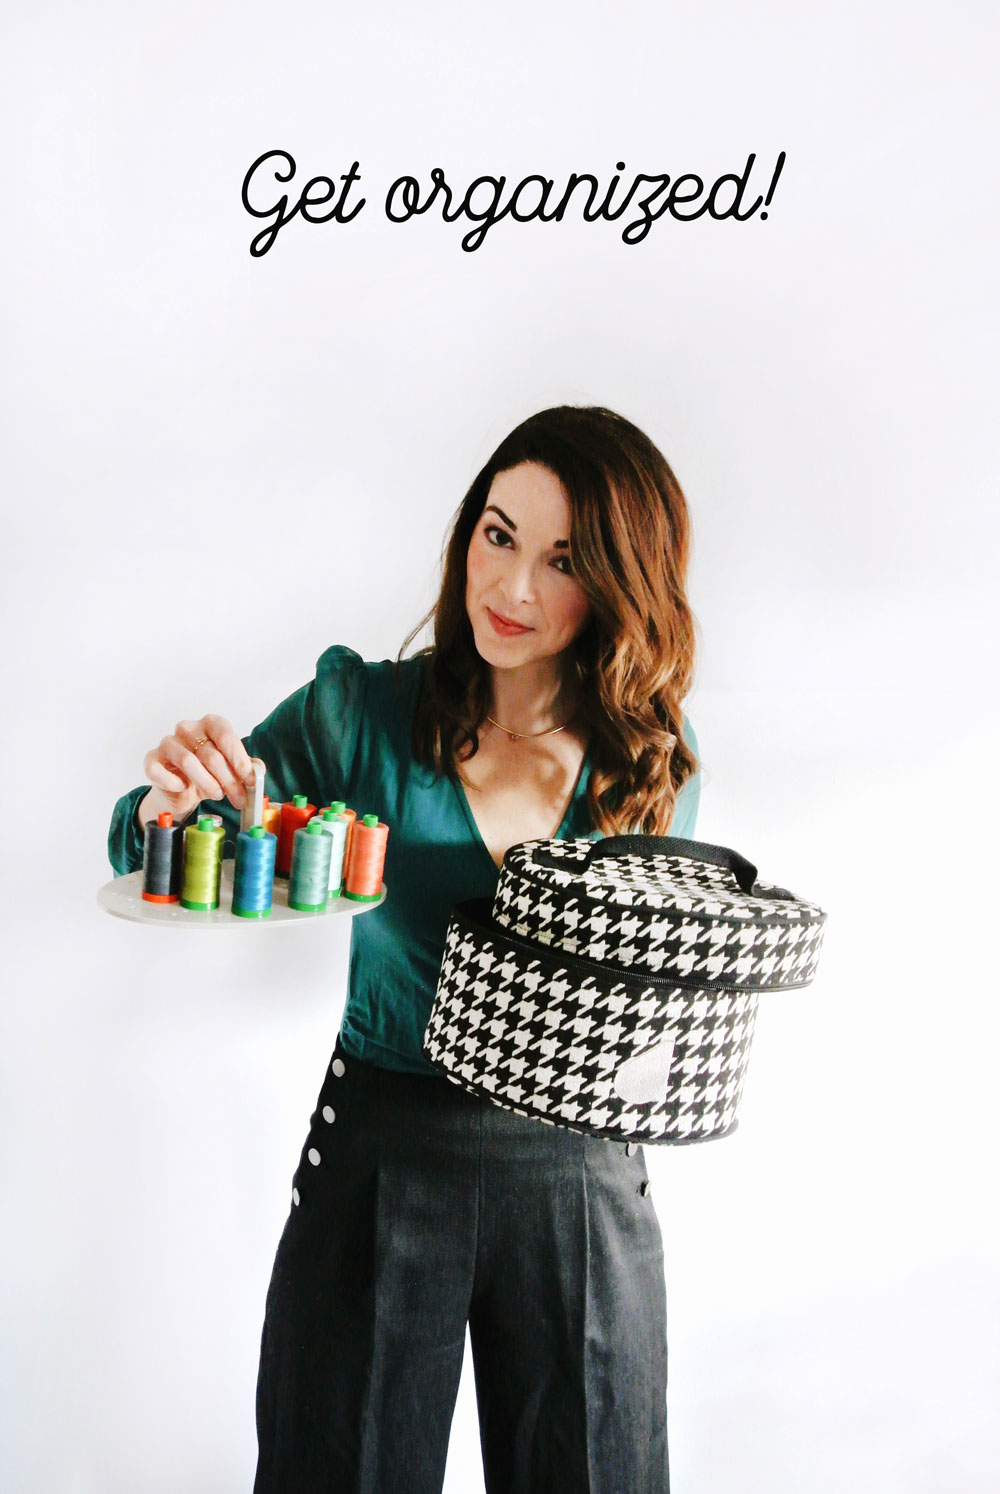 Stay Organized with Bluefig Sewing Bags! Stylish and Practical Sewing Bags | Suzy Quilts https://suzyquilts.com/bluefig-sewing-bags